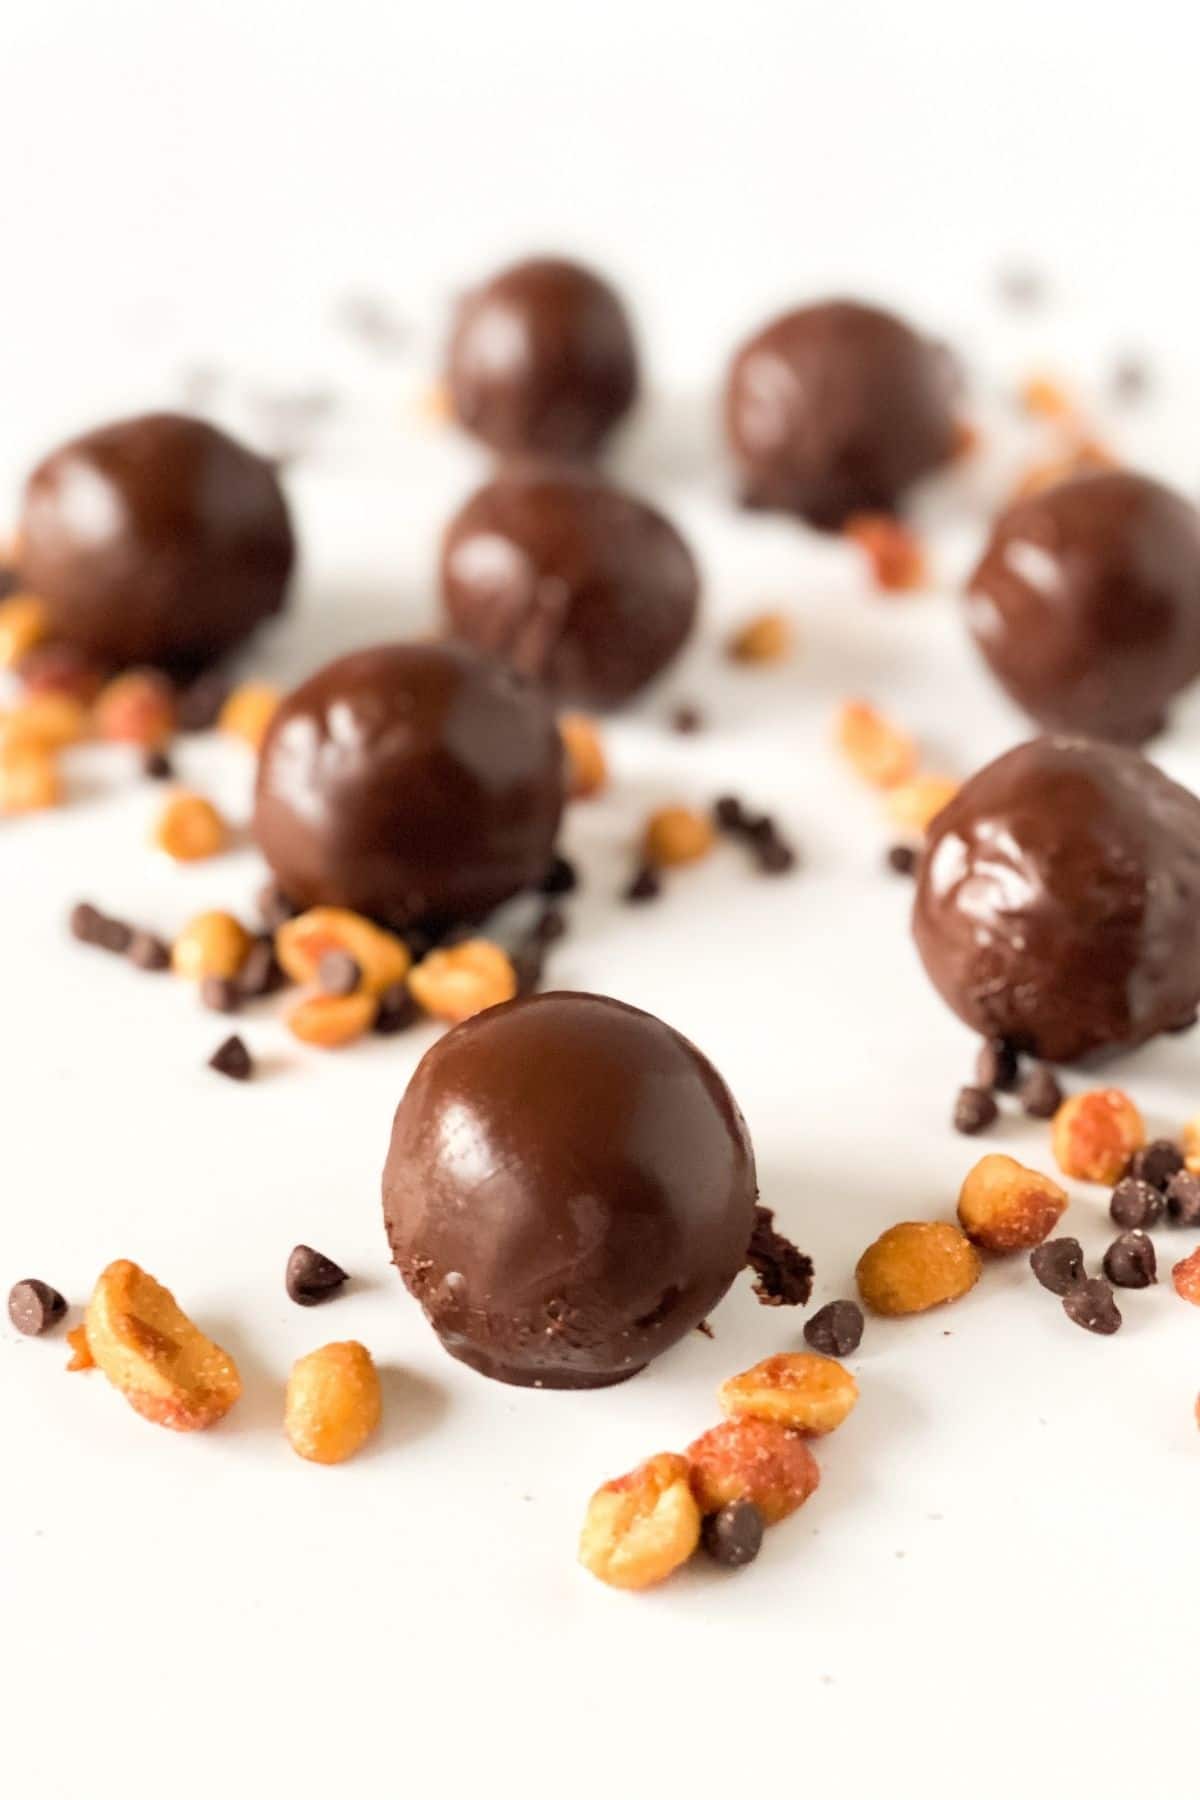 Chocolate peanut butter balls on table